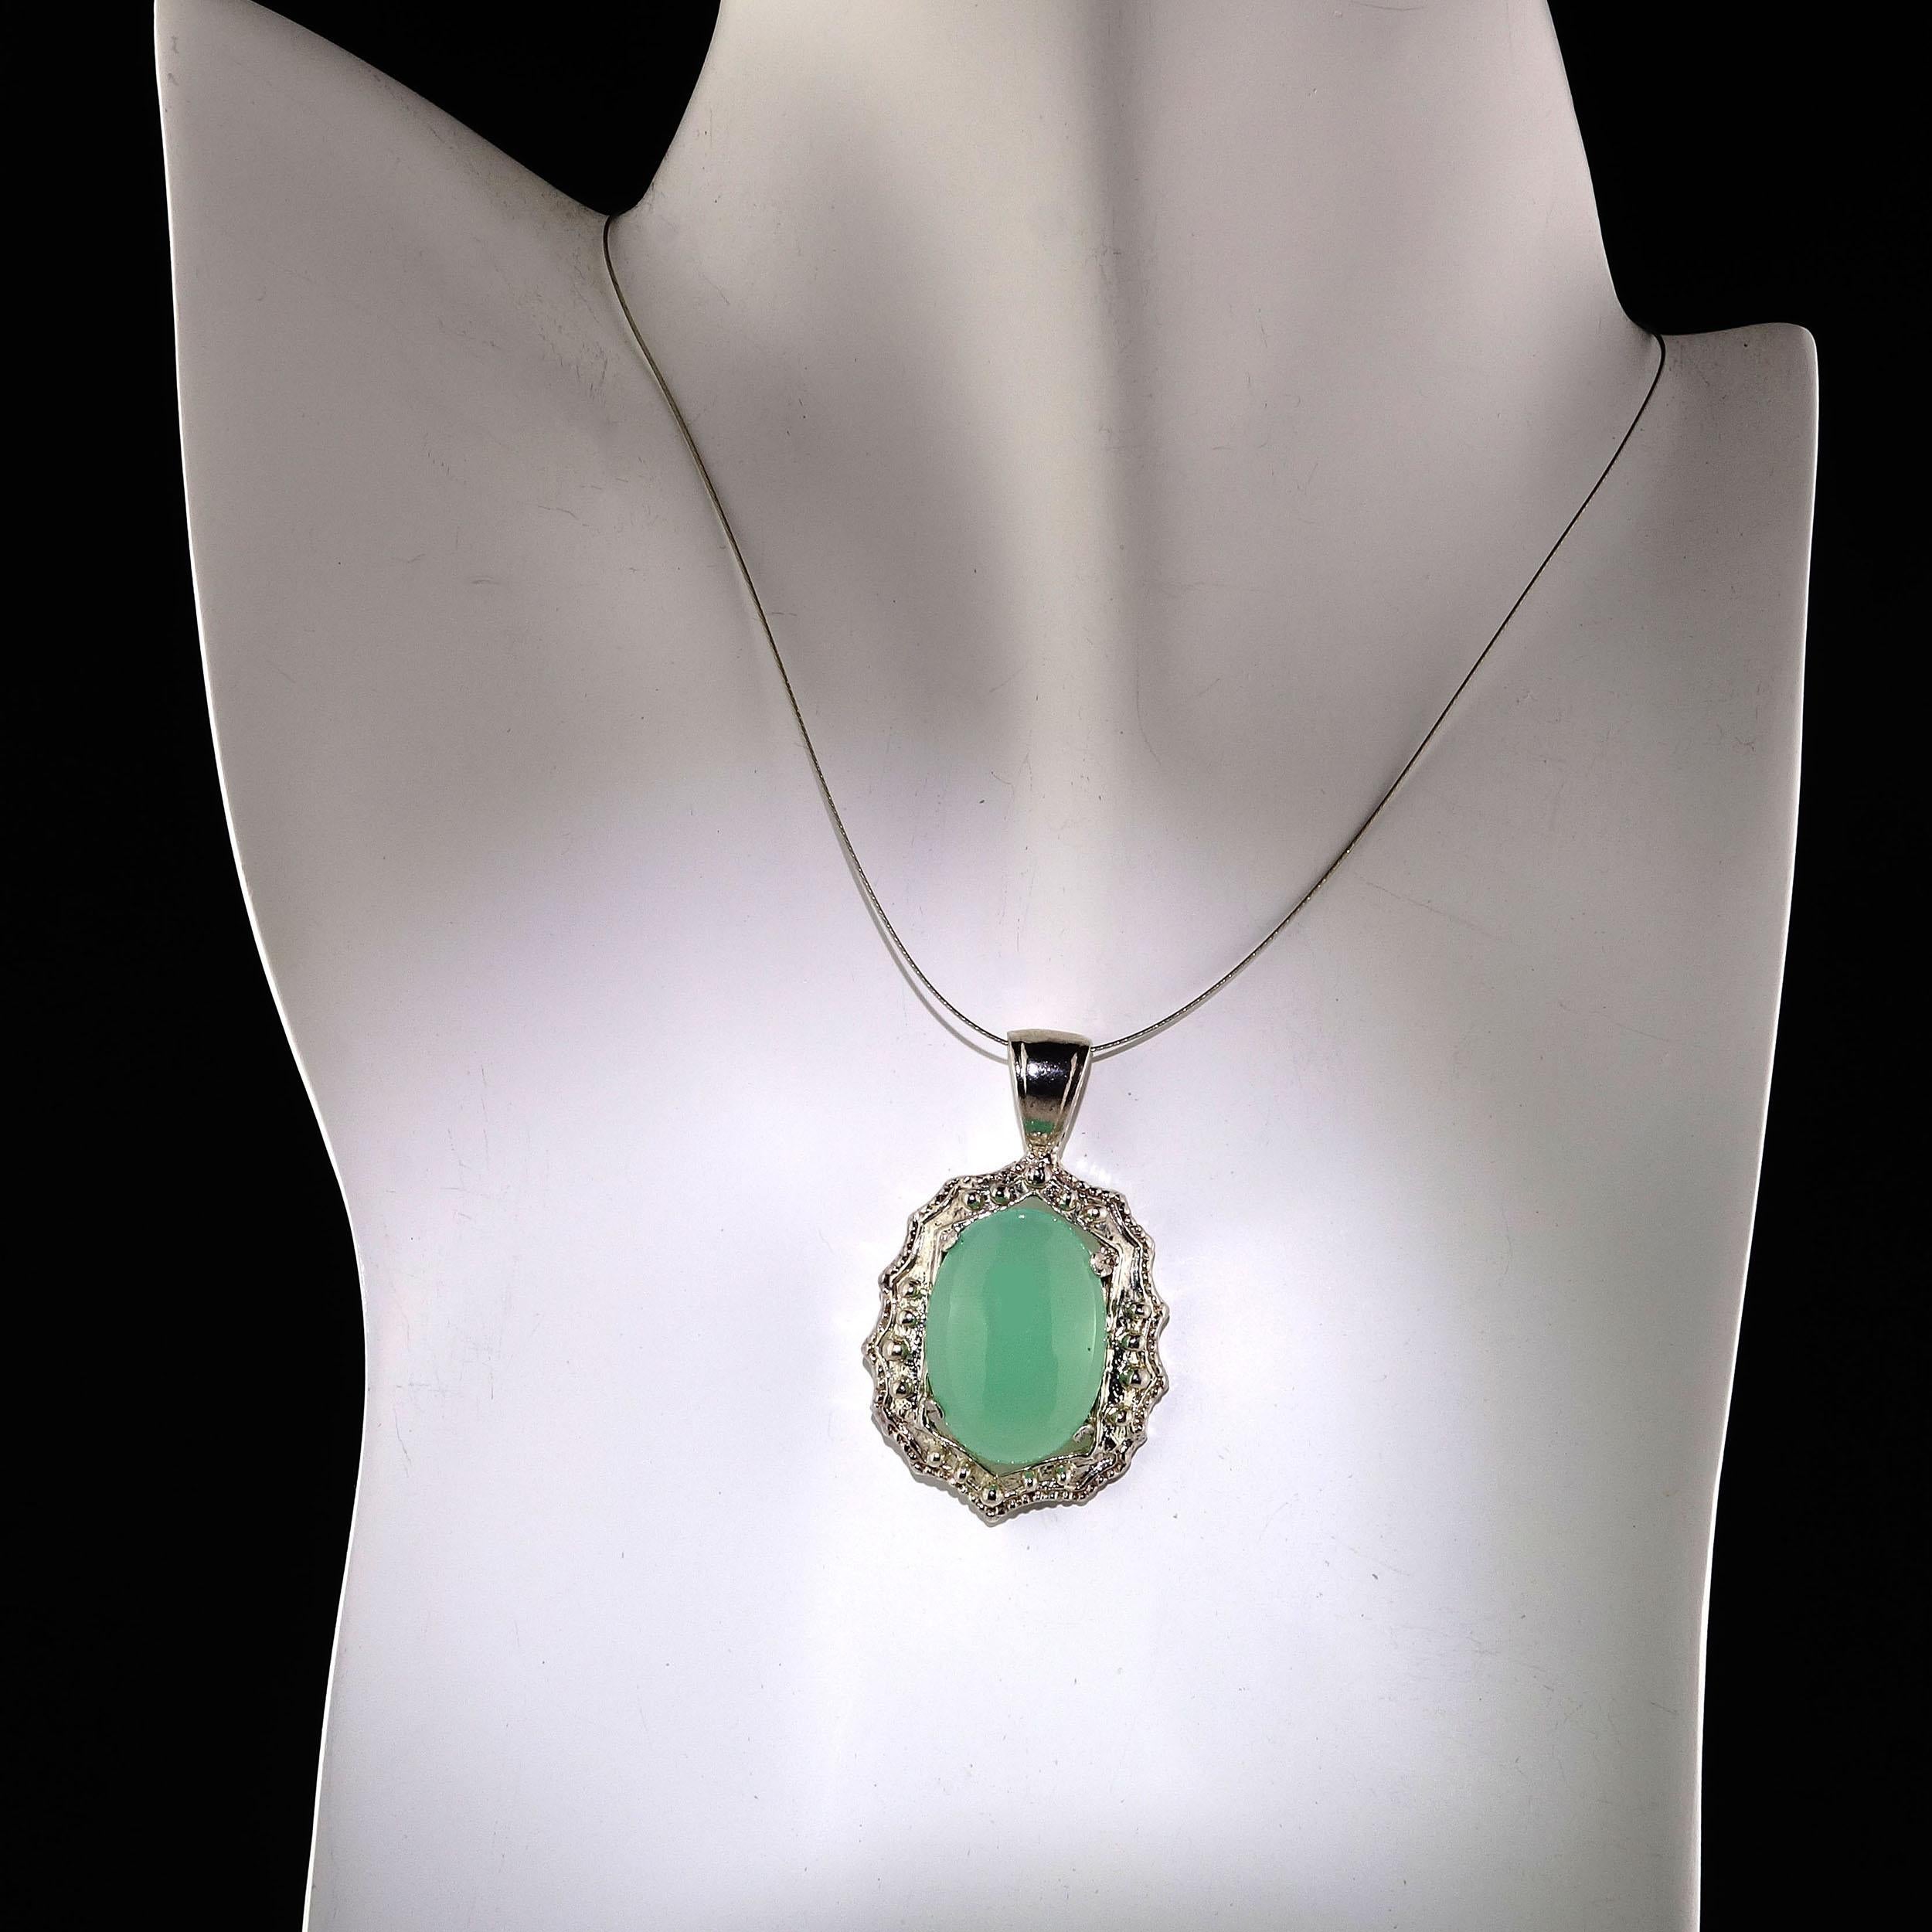 Unique warm, glowing Chrysophrase in fancy detailed Sterling Silver pendant. This lovely Chrysophrase is 20 x 15 MM, and weighs 11.90 carats. Wear this elegant pendant with all your Spring fashions. The soft green is complementary to everything in